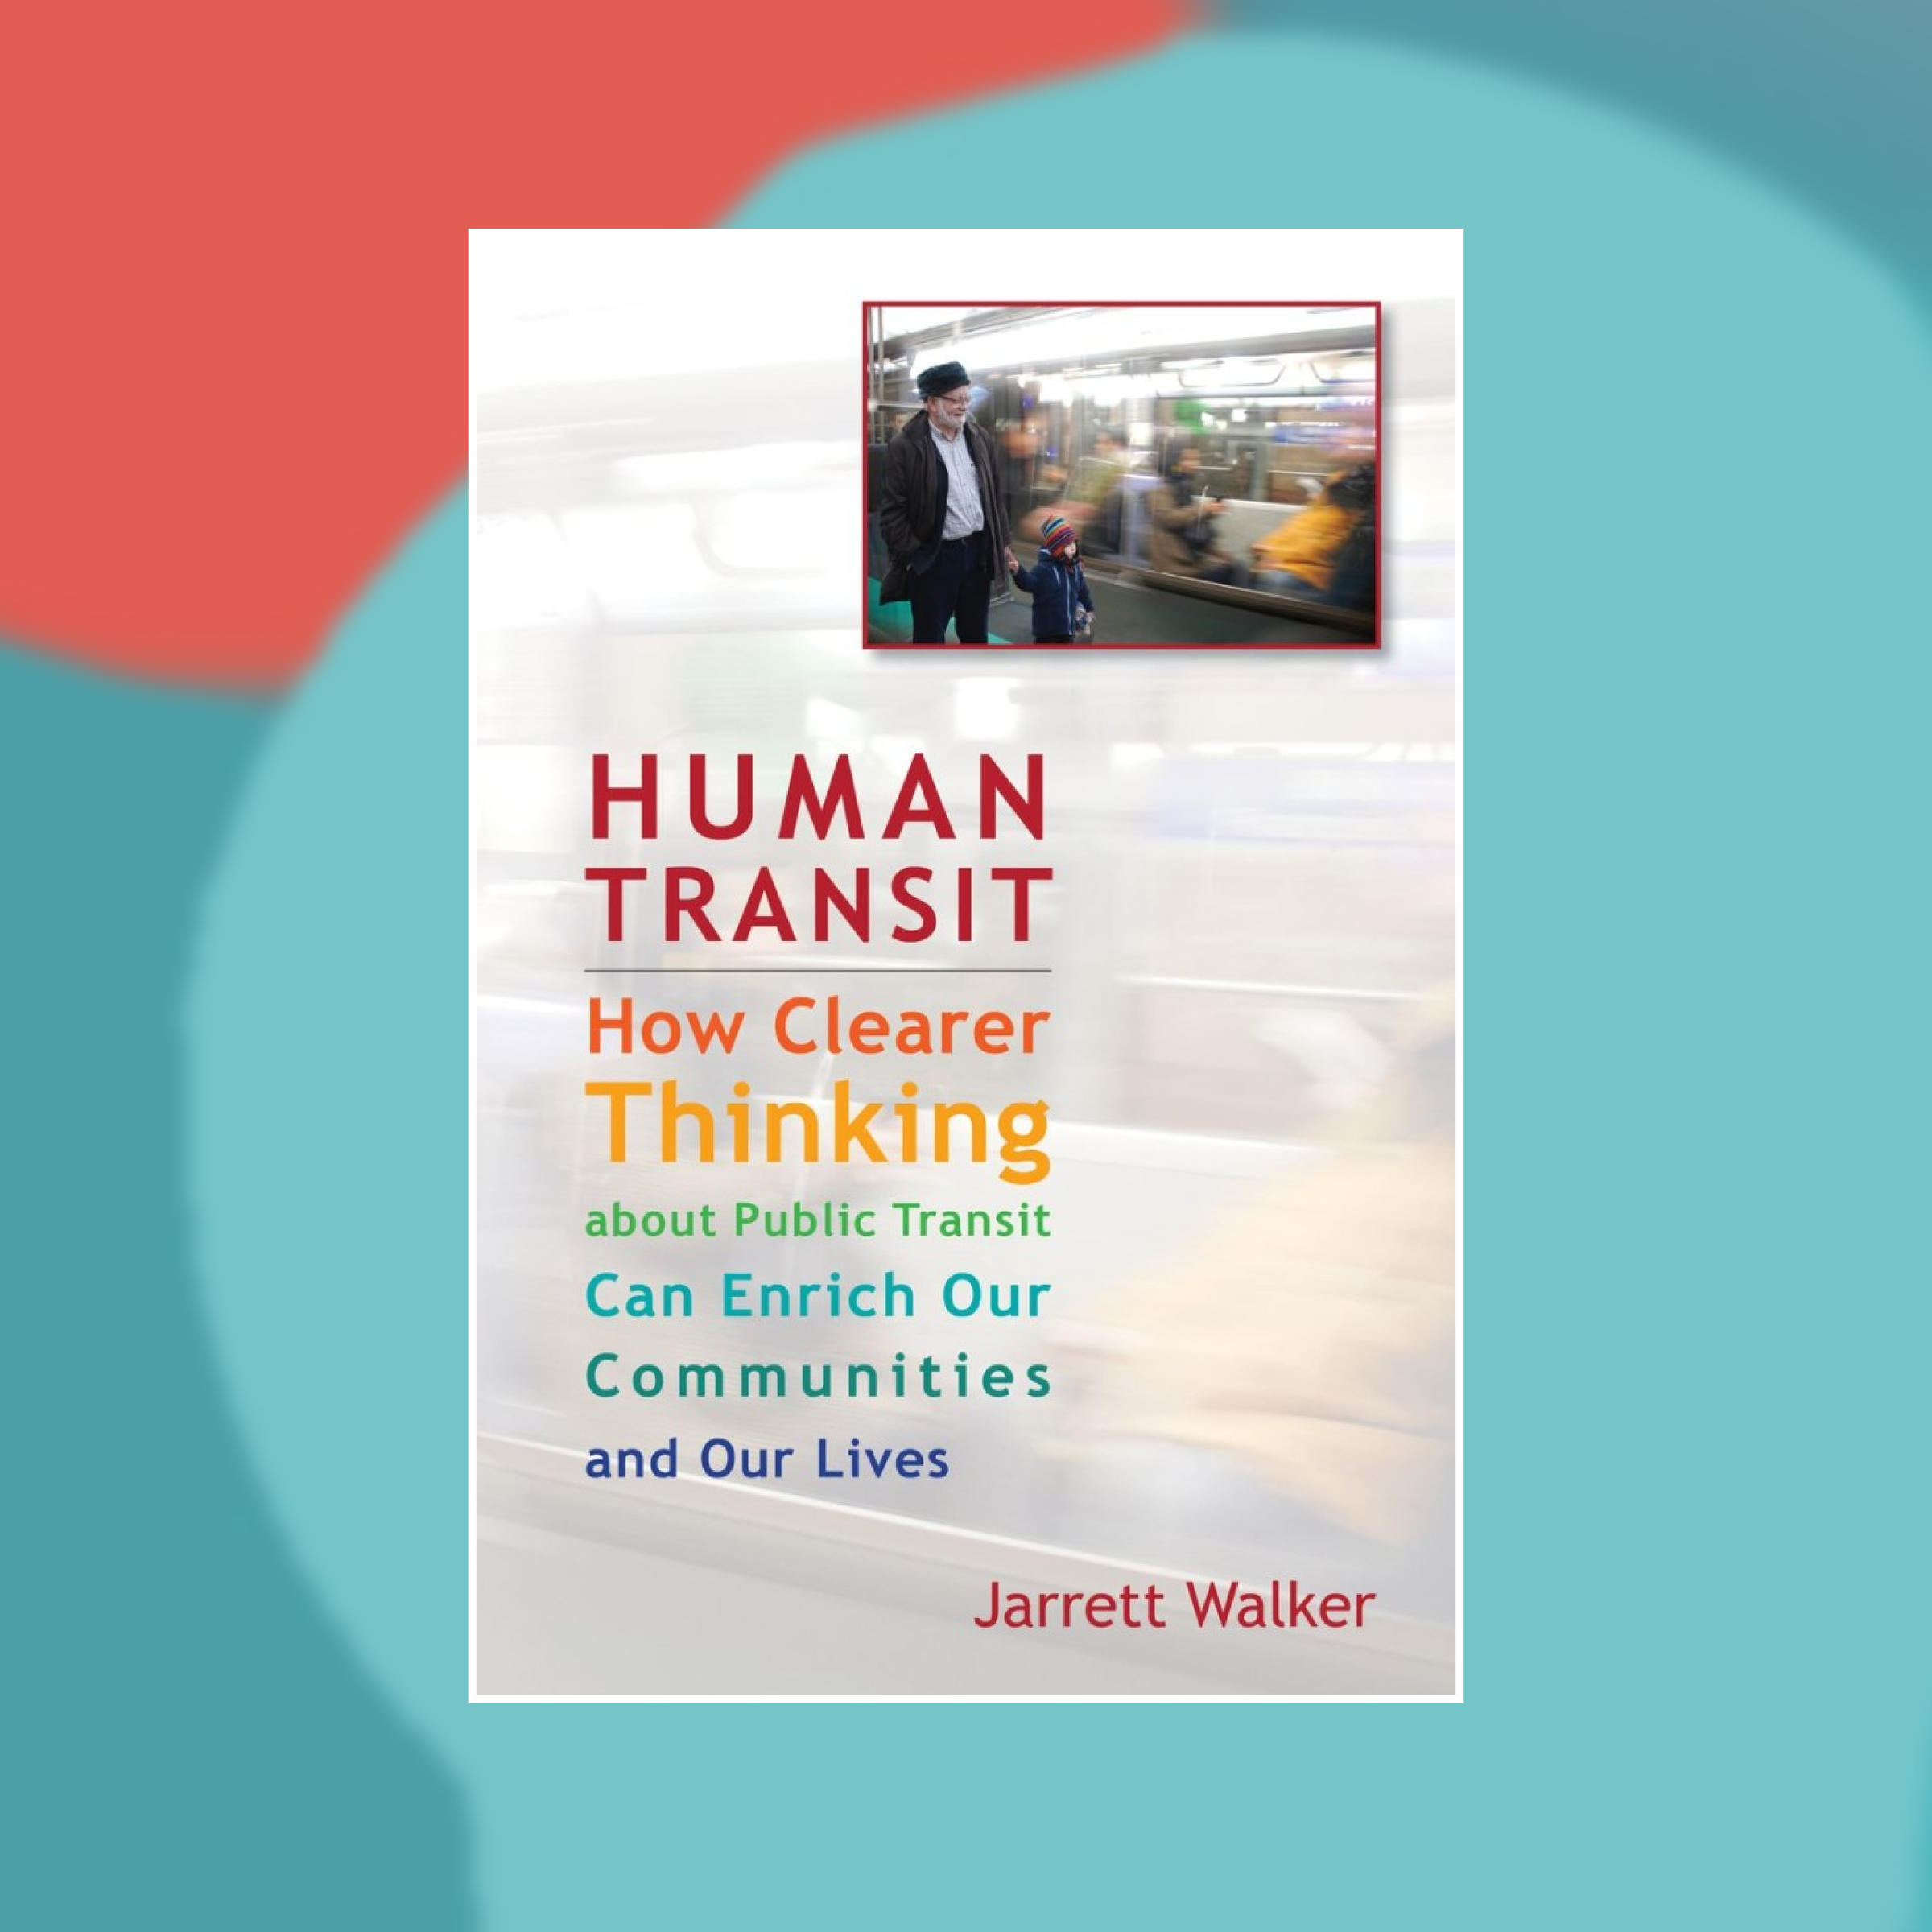 Book cover of The Human Transit against an abstract painted background